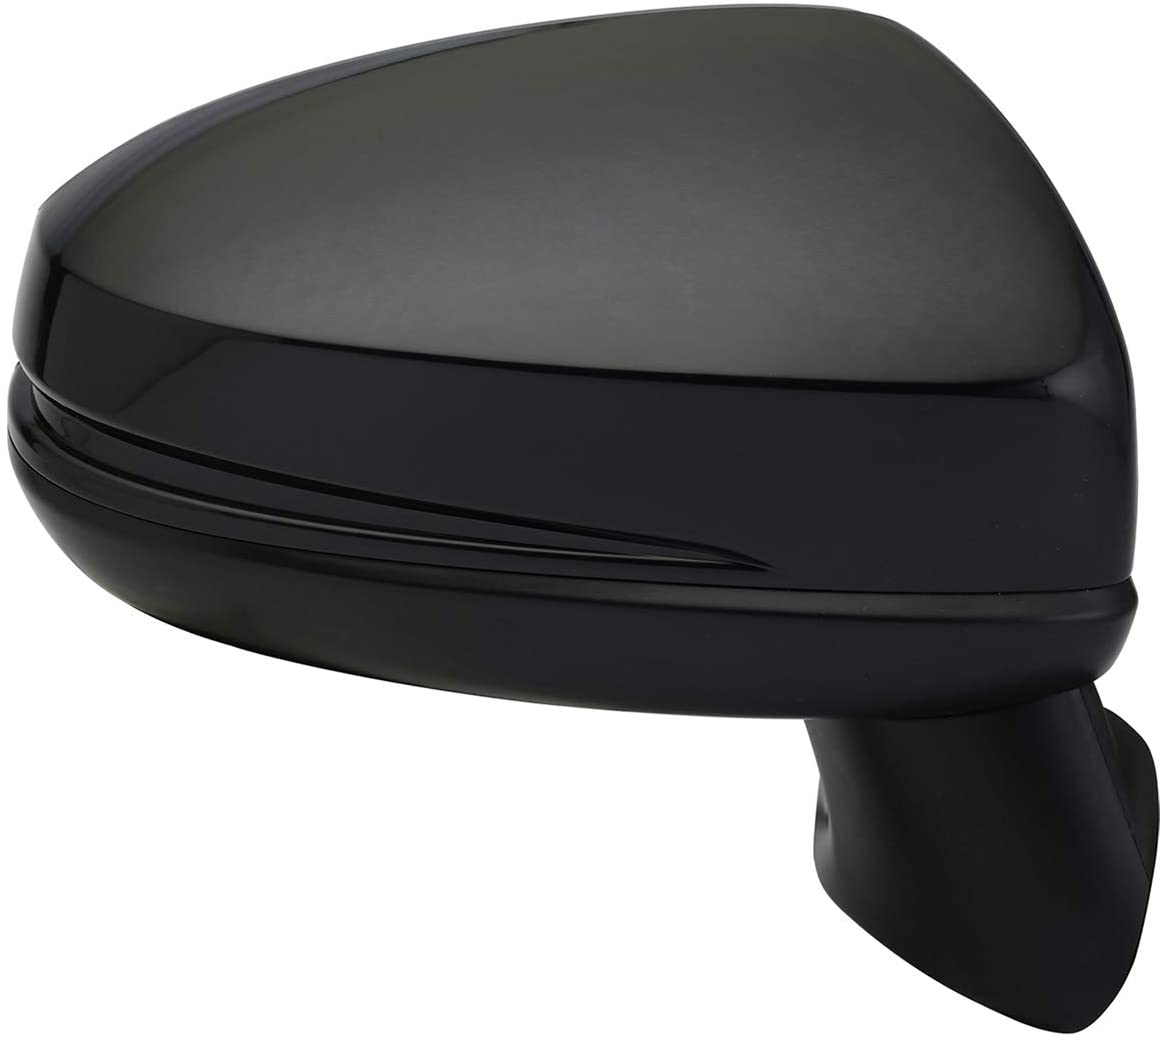 Aftermarket MIRRORS for HONDA - FIT, FIT,15-20,RT Mirror outside rear view